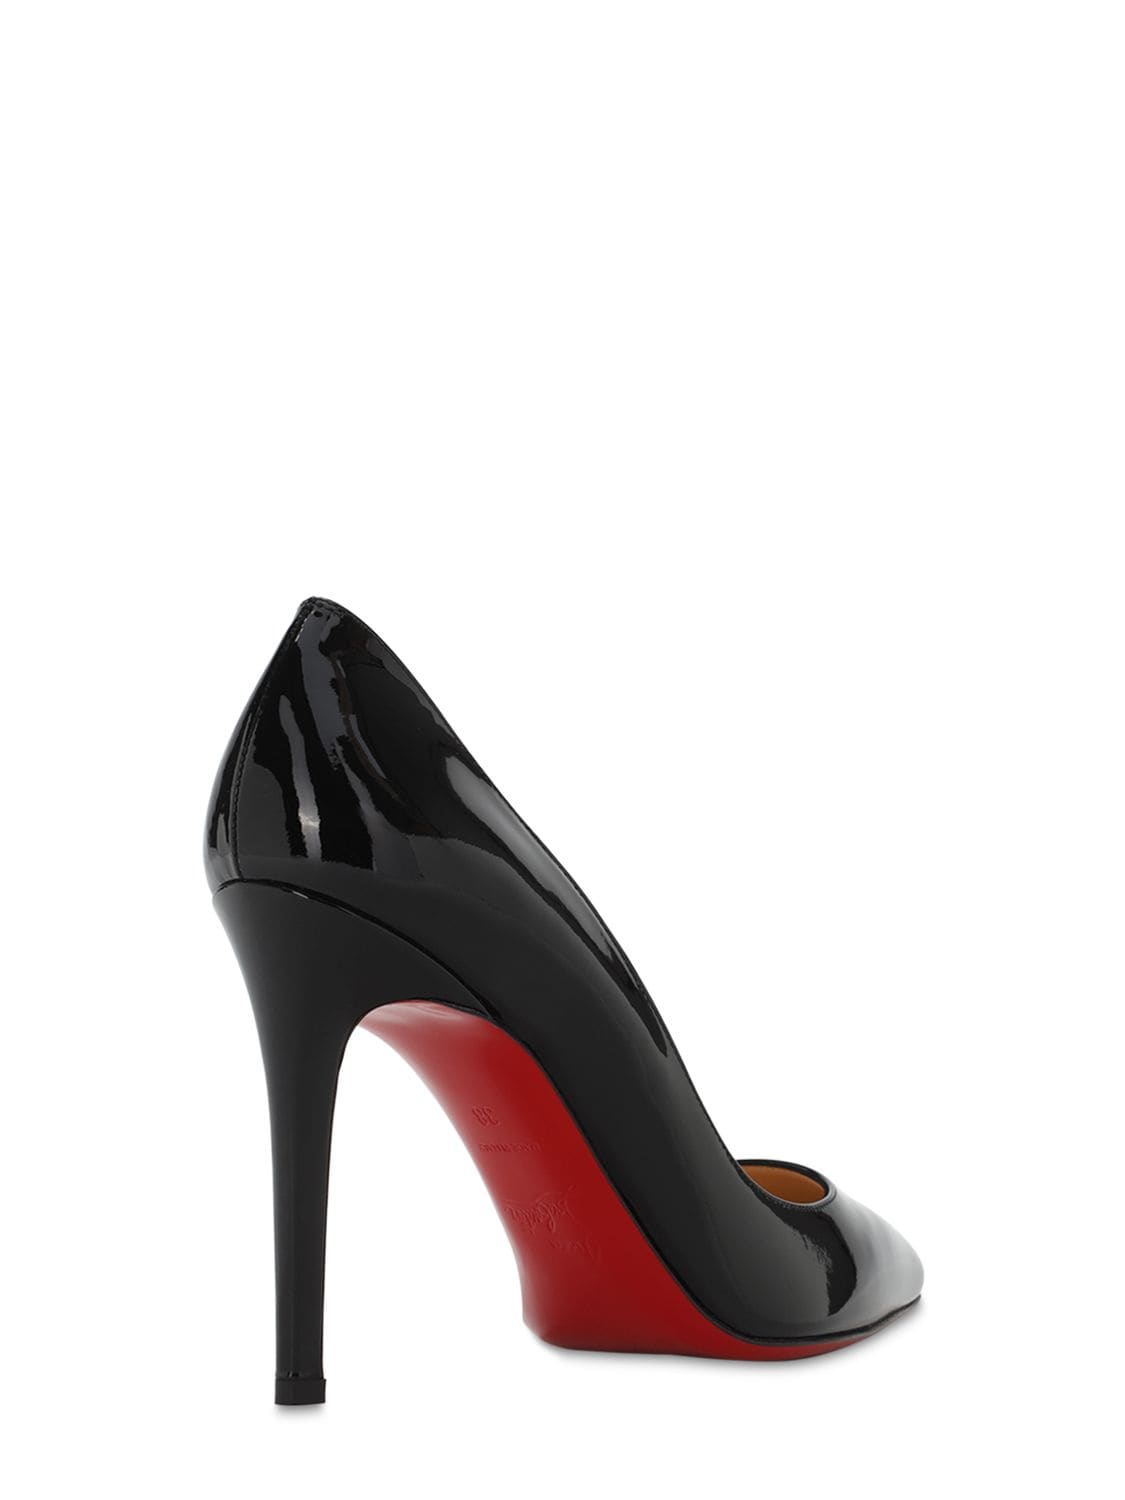 skål Lionel Green Street film Christian Louboutin 100mm Pigalle Patent Leather Pumps In Black | ModeSens